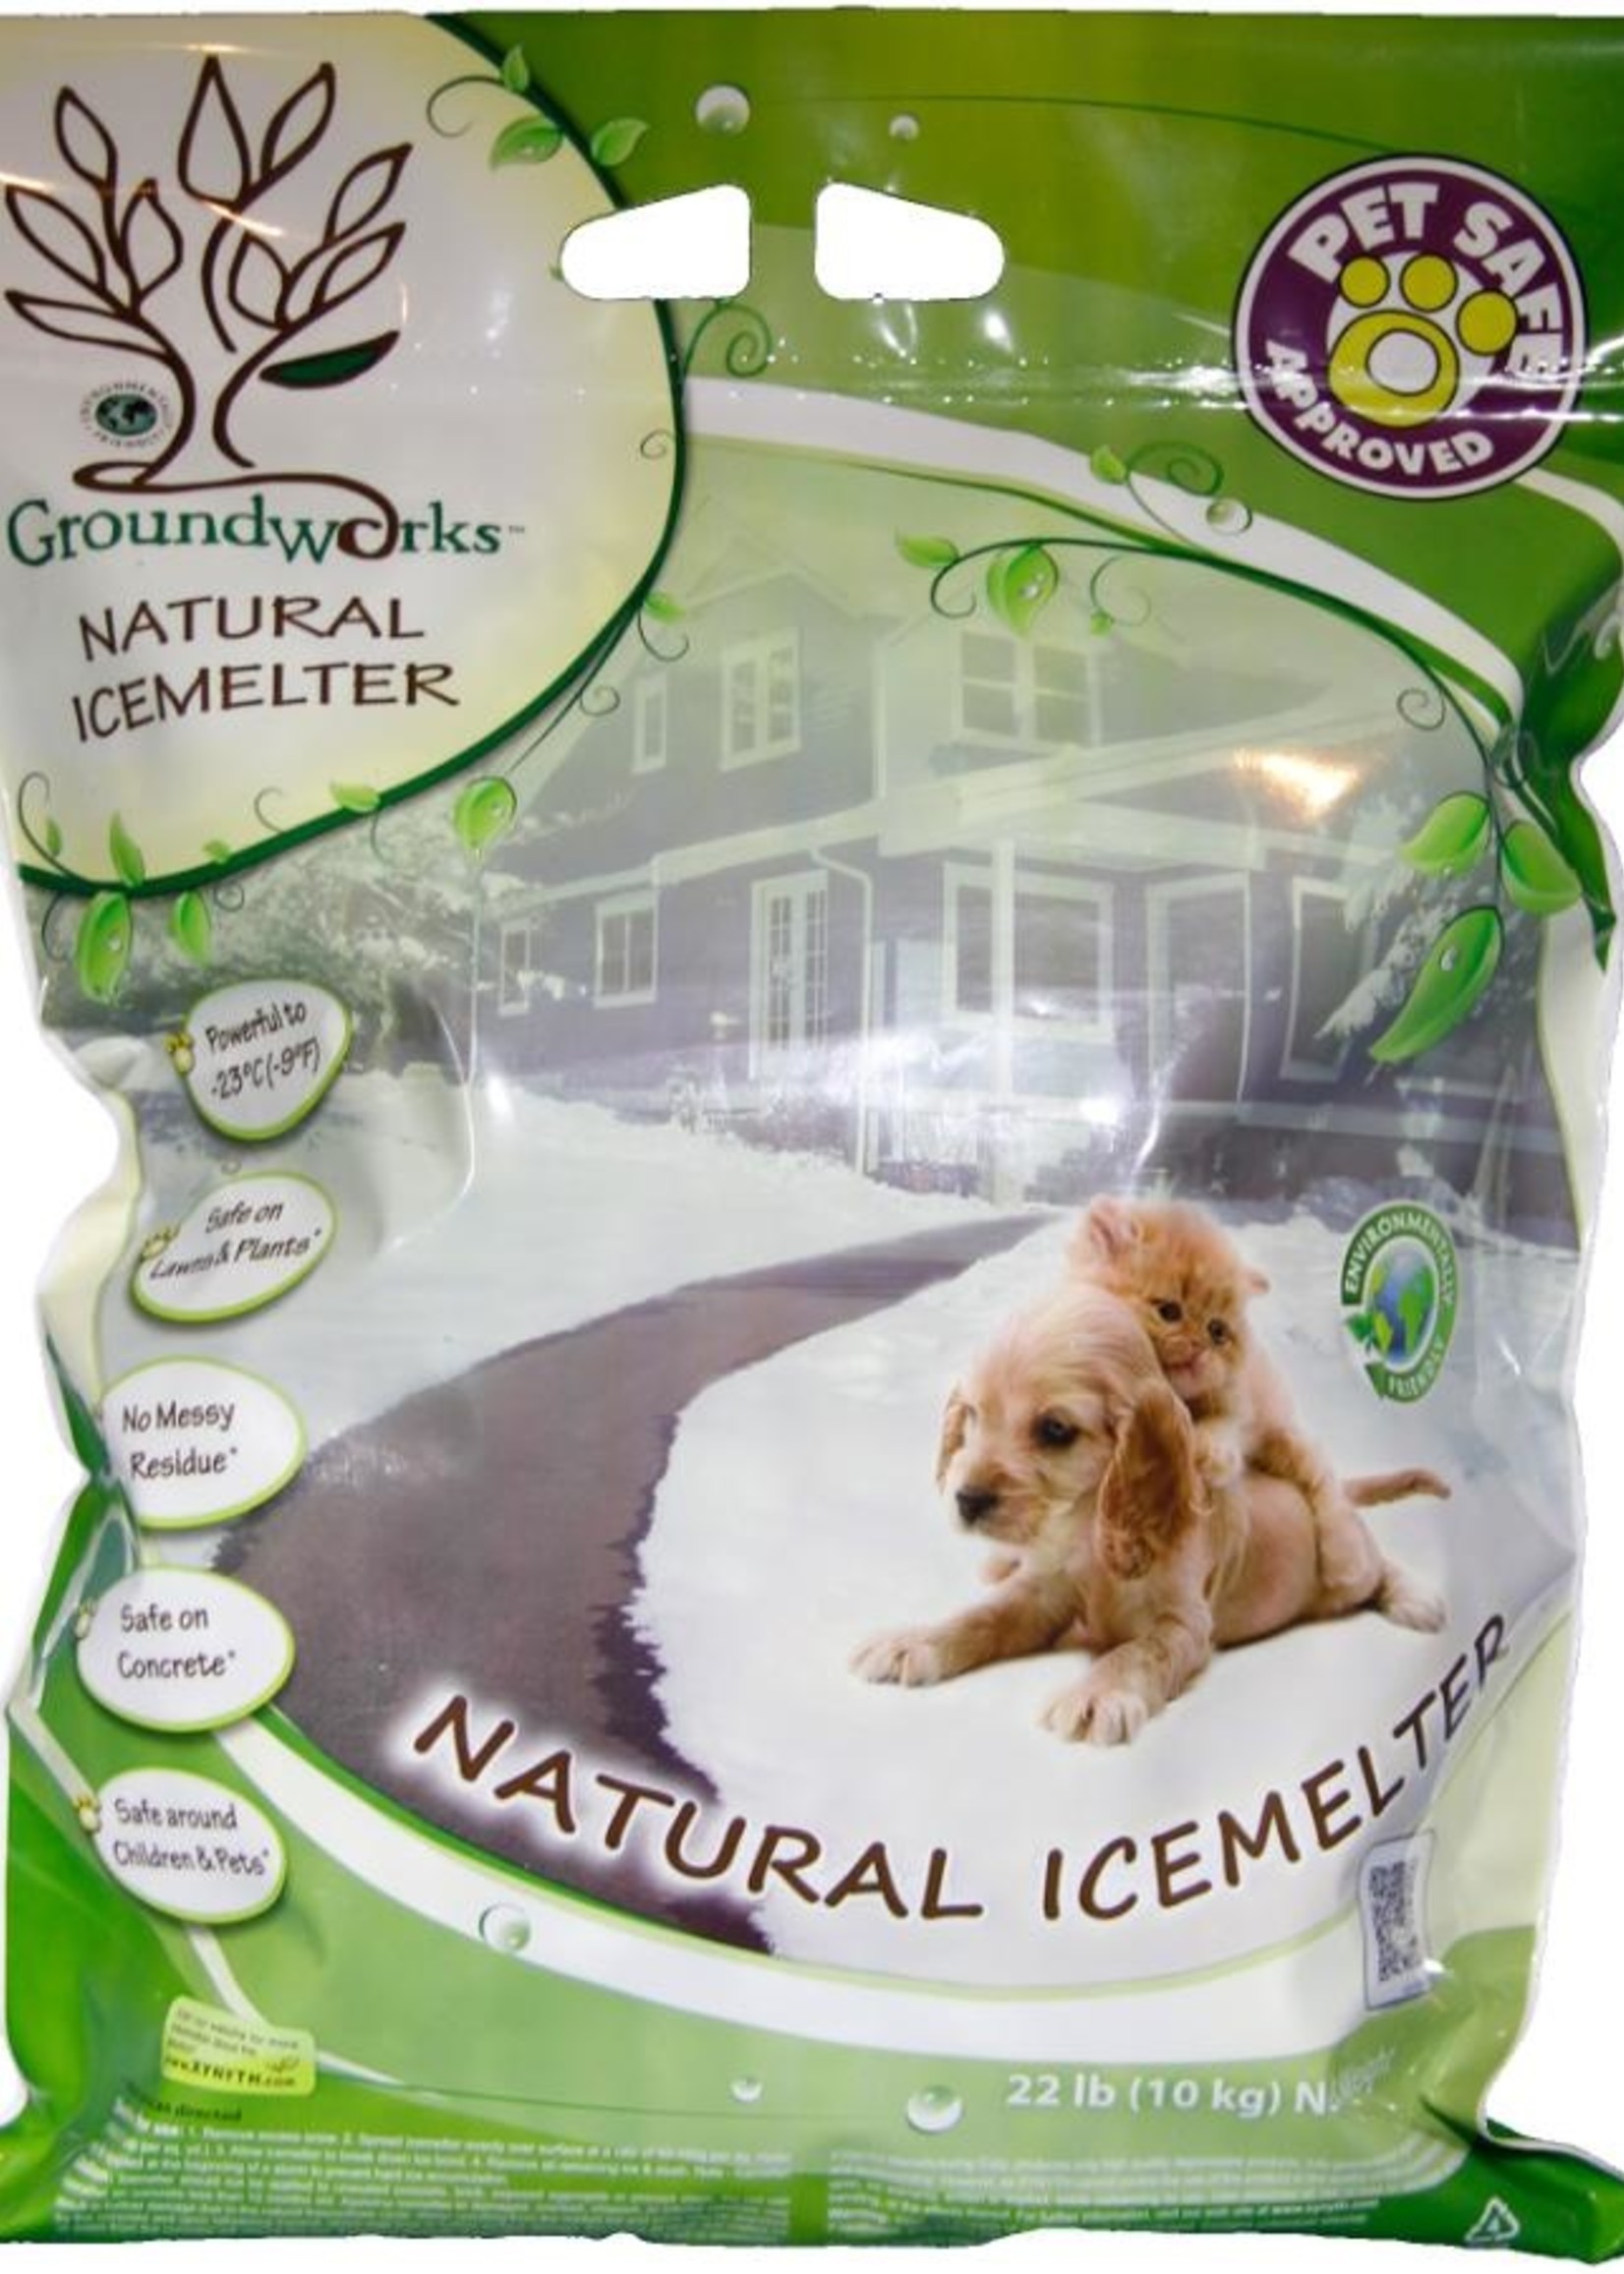 Groundworks Natural Icemelter 22 lb